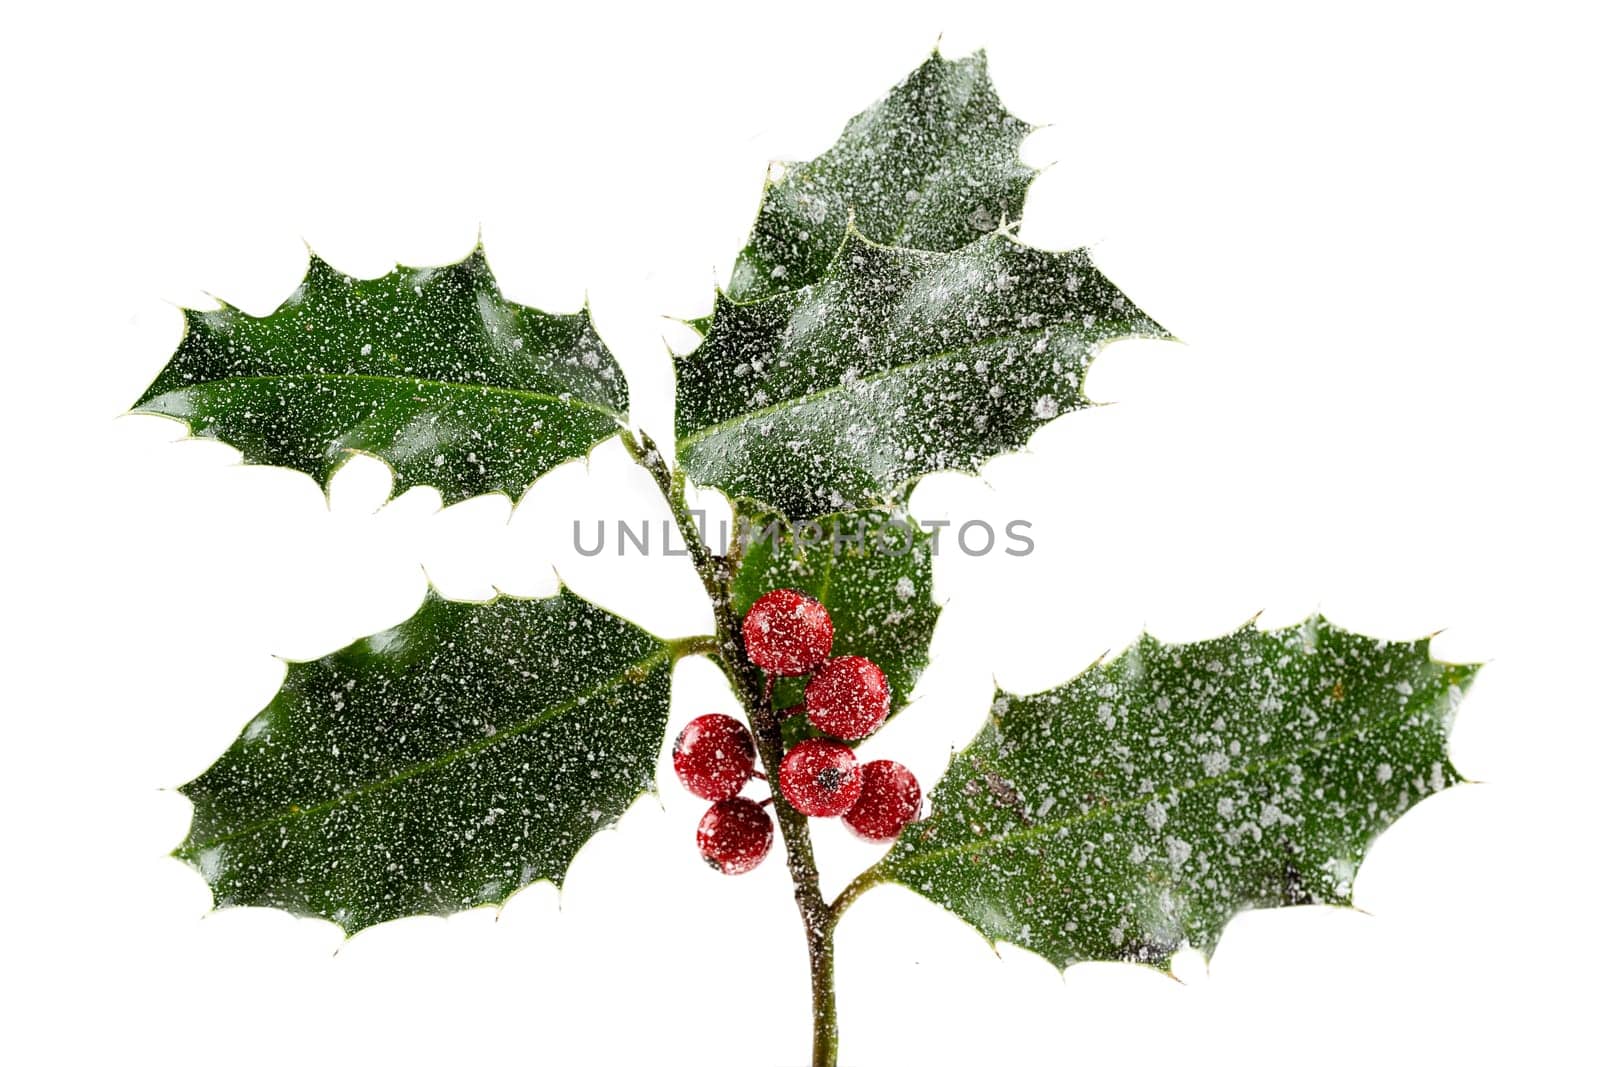 Holly With Red Berries. Traditional festive decoration. Holly branch with red berries on white.